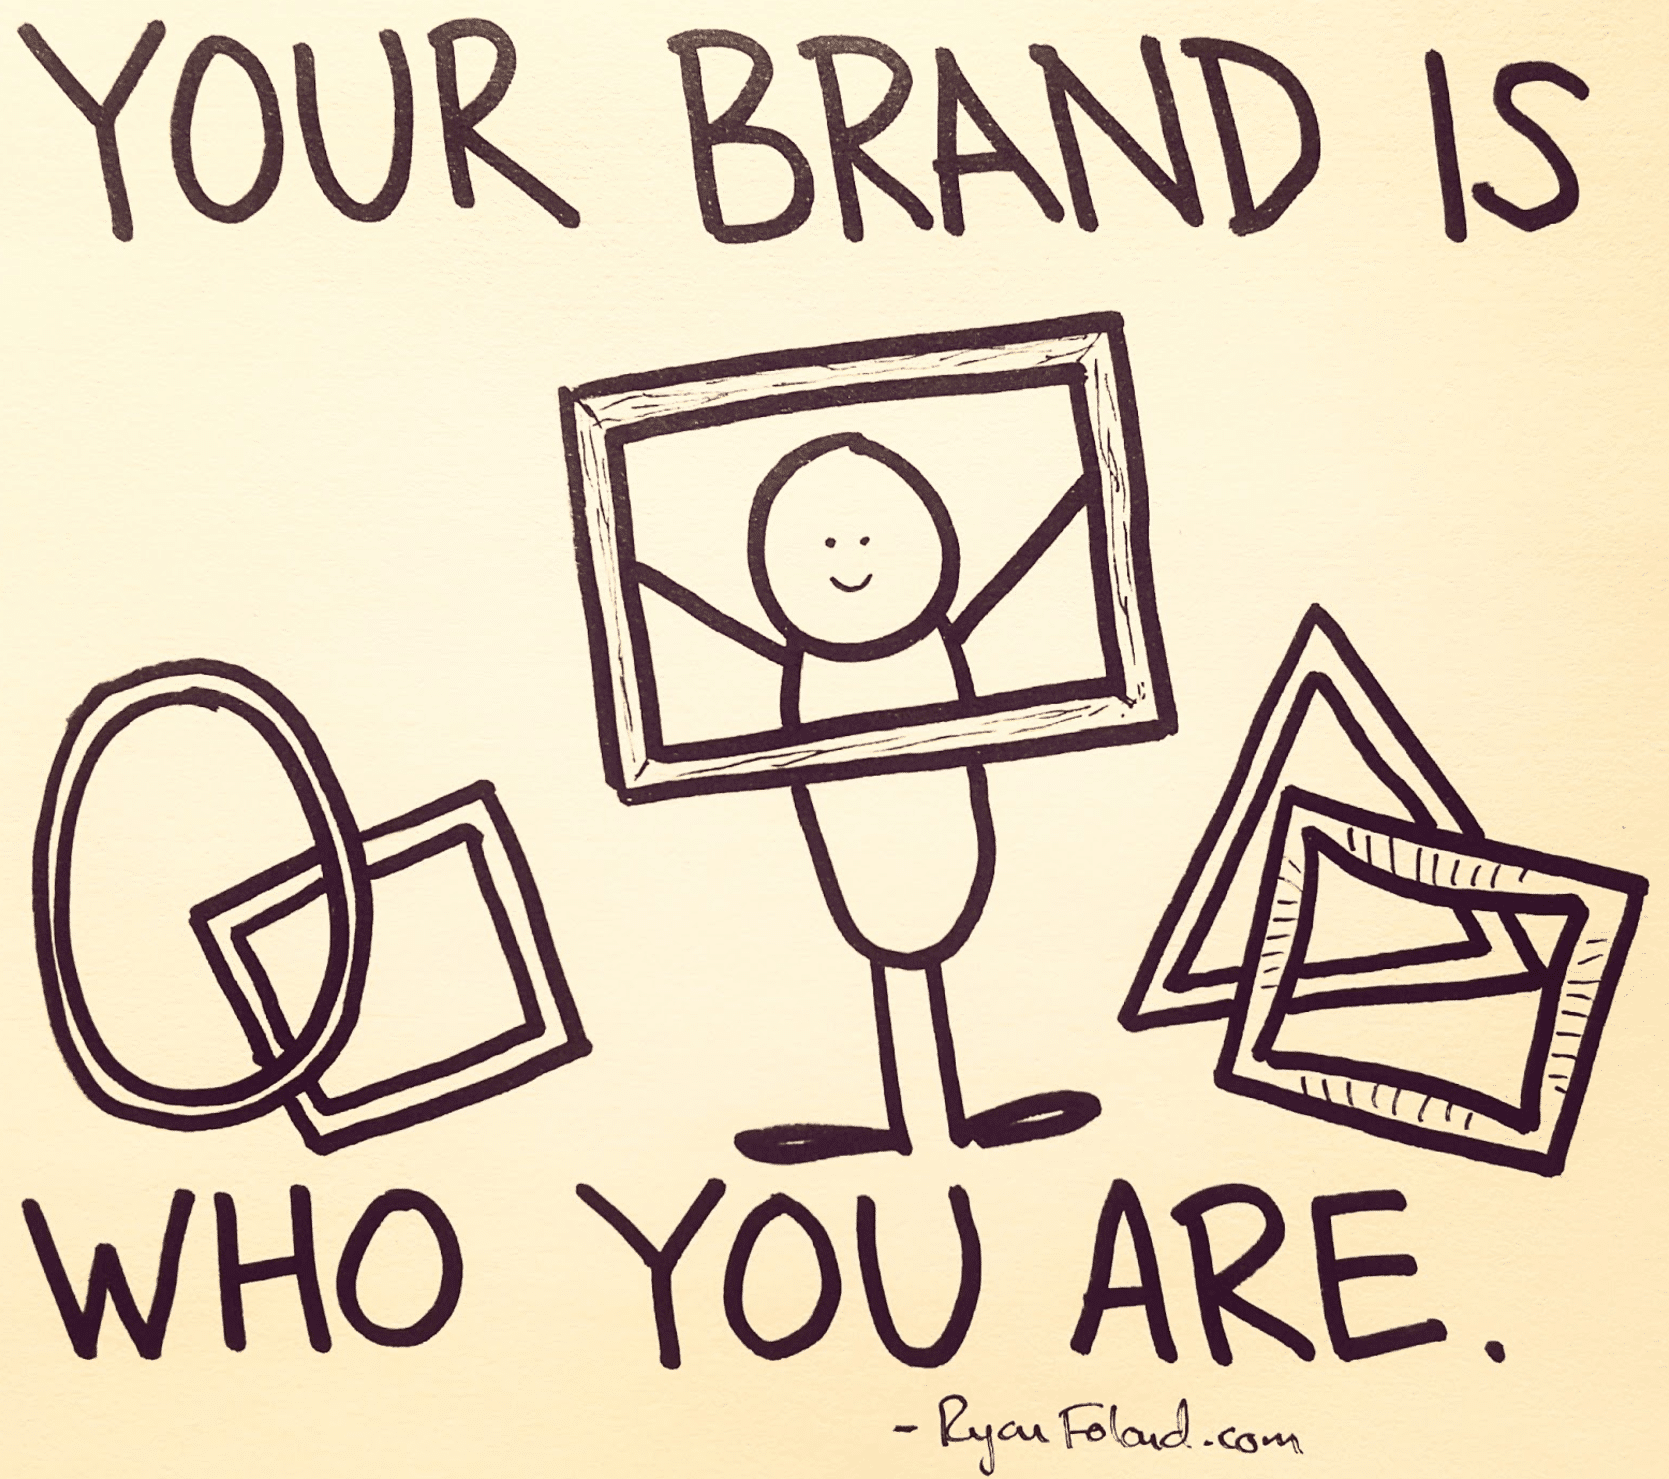 You brand is who you are, quote by Ryan Foland.